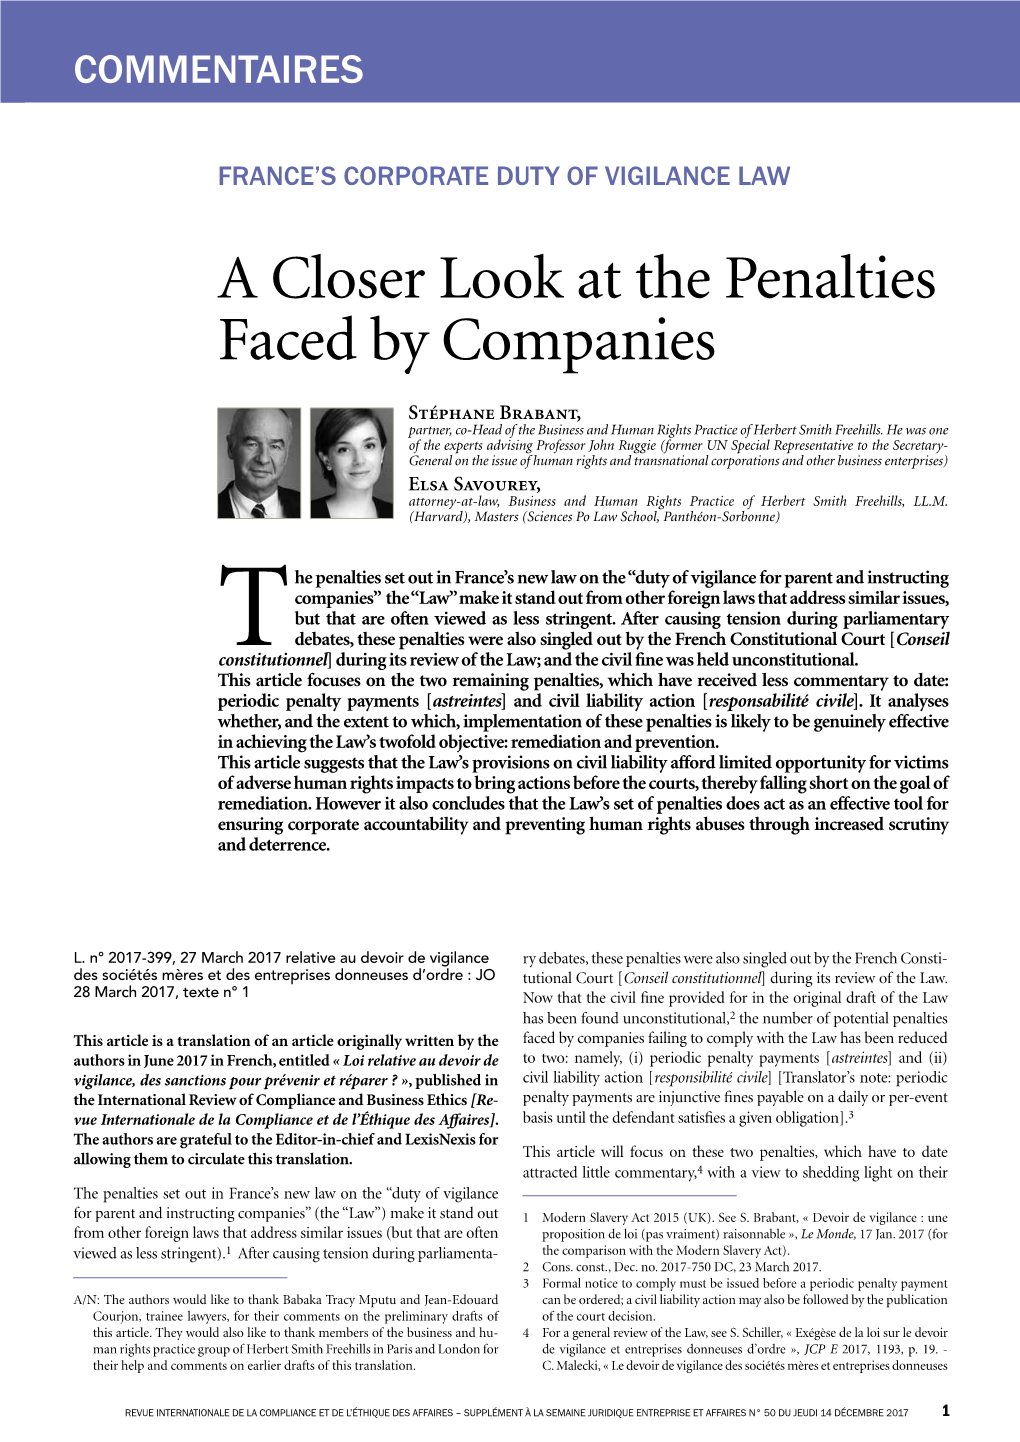 A Closer Look at the Penalties Faced by Companies